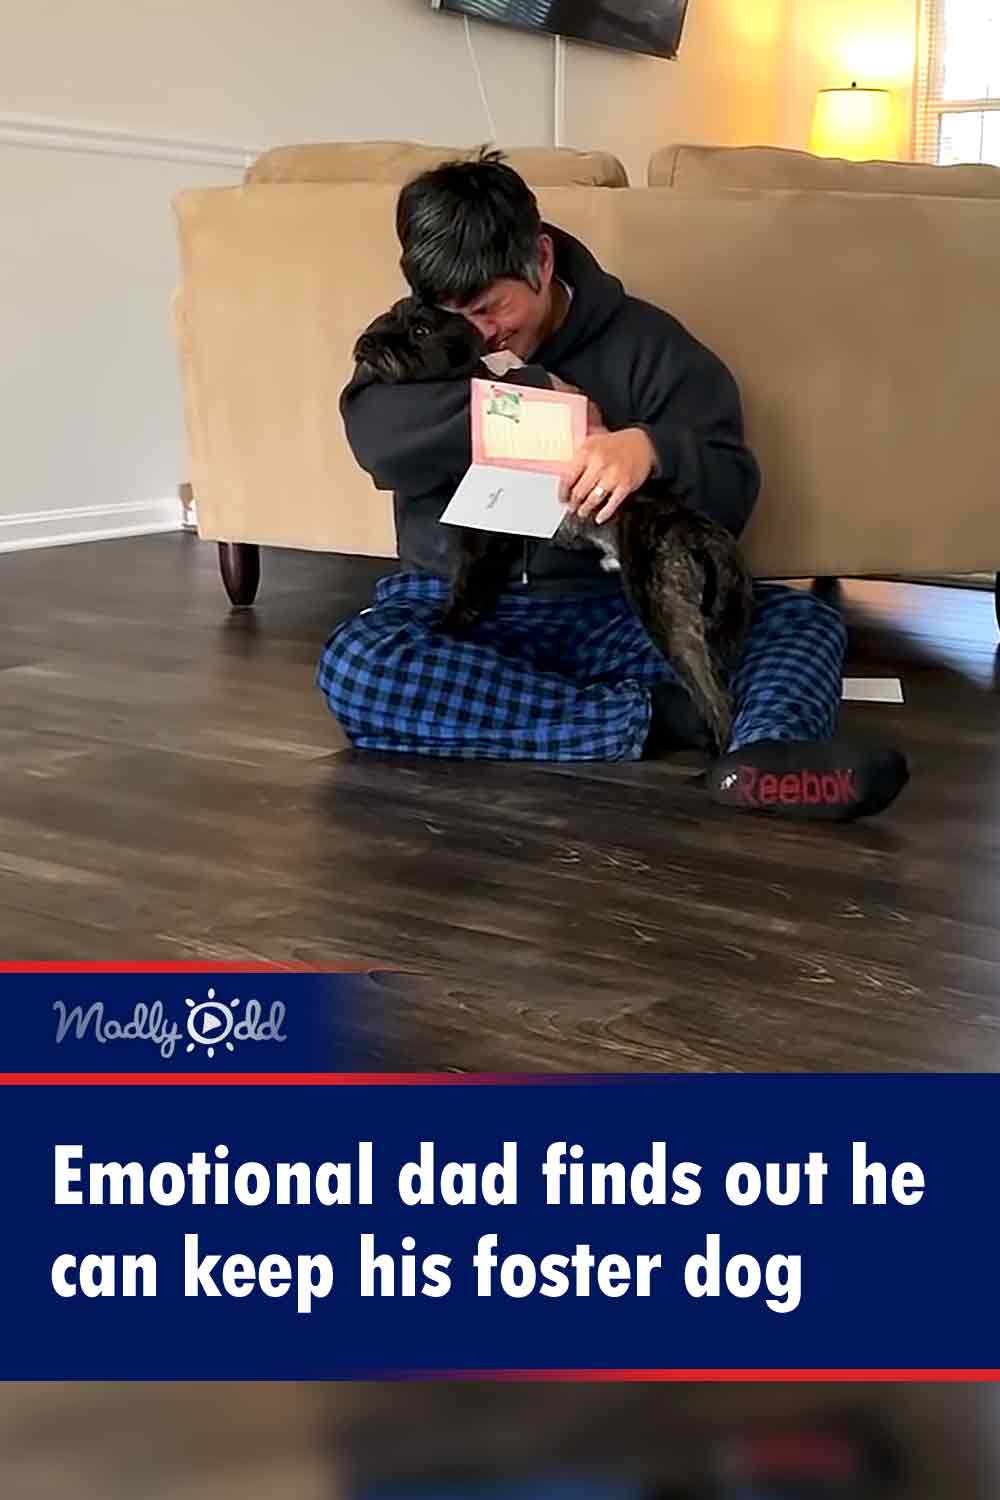 Emotional dad finds out he can keep his foster dog